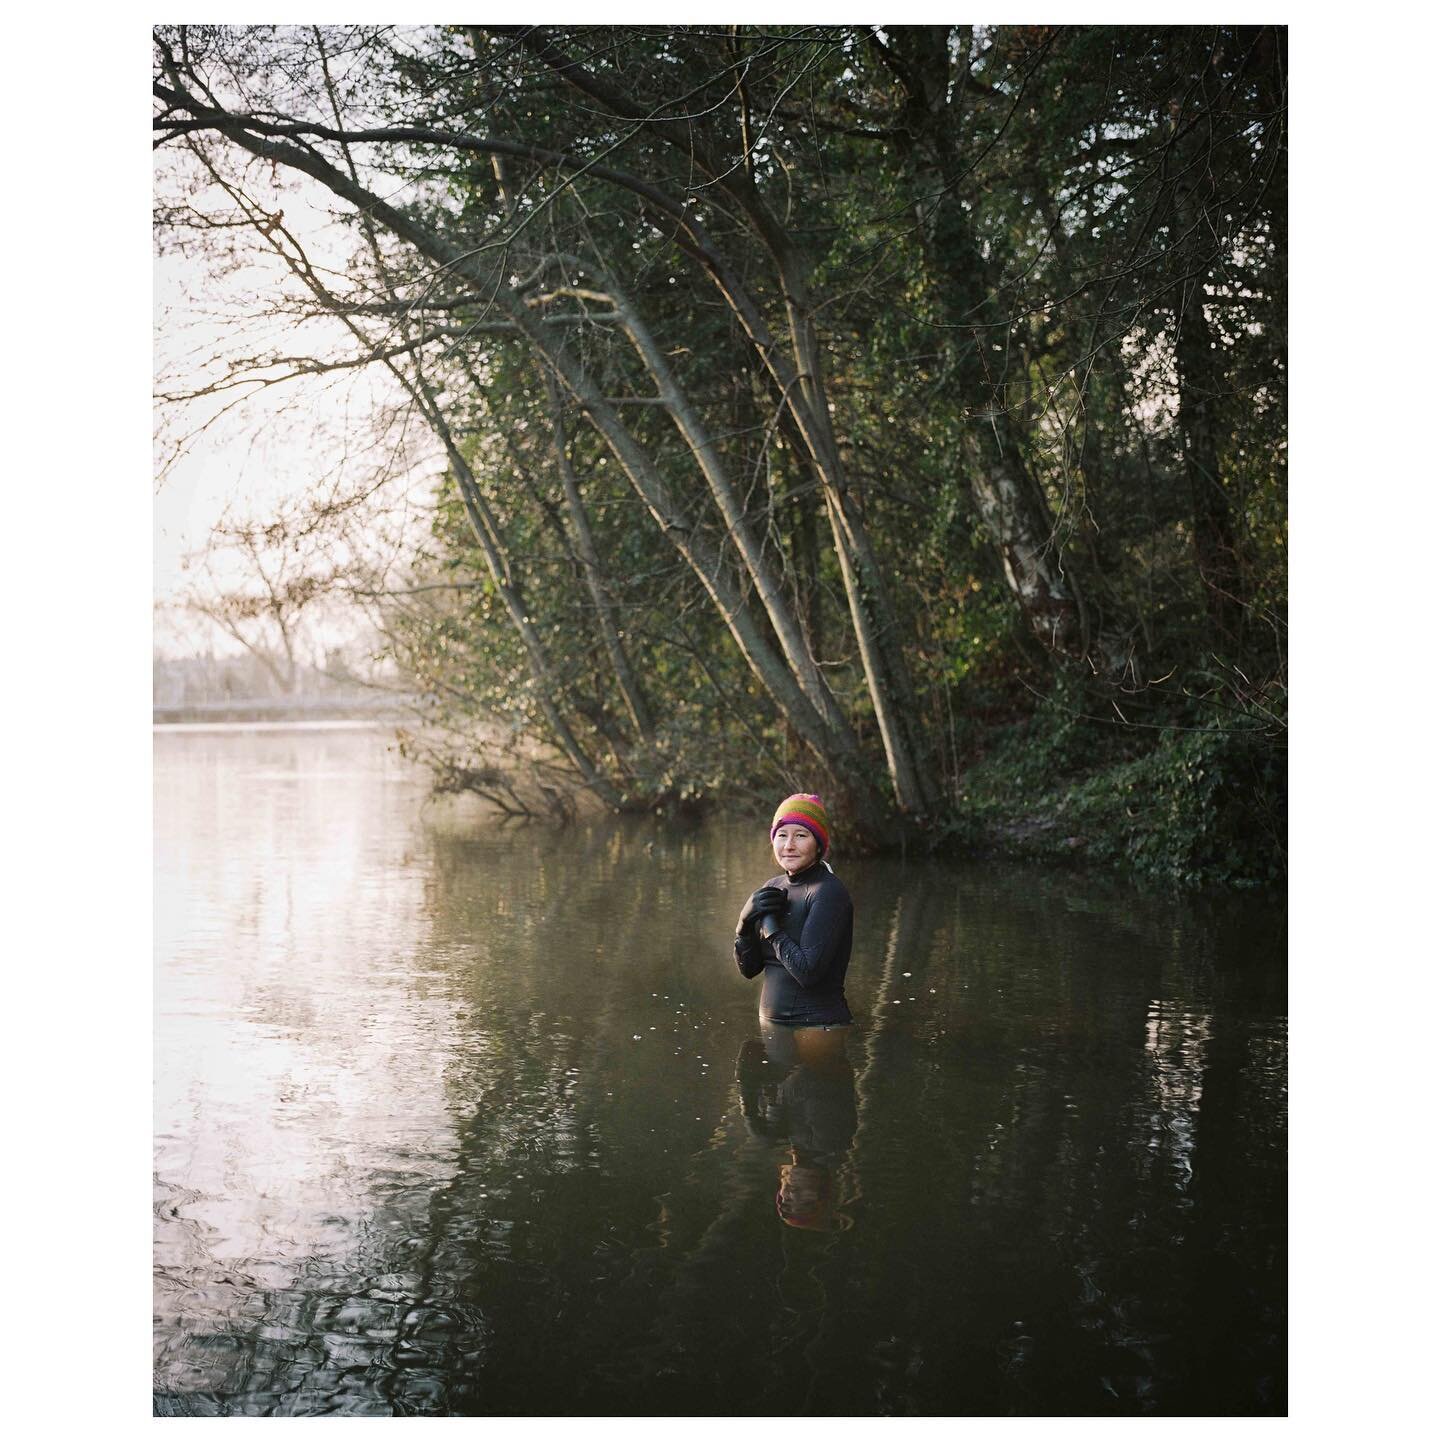 Anastasia at the mixed pond, Hampstead Jan &lsquo;23
.
As much as I love the icy cold swims in winter, I&rsquo;m ready for spring; warmer days and more light. 
.
.
.
.
.
.
.
.
.
.
.
.
.
#hampsteadheath #hampsteadponds #analogue_people #filmphotograph